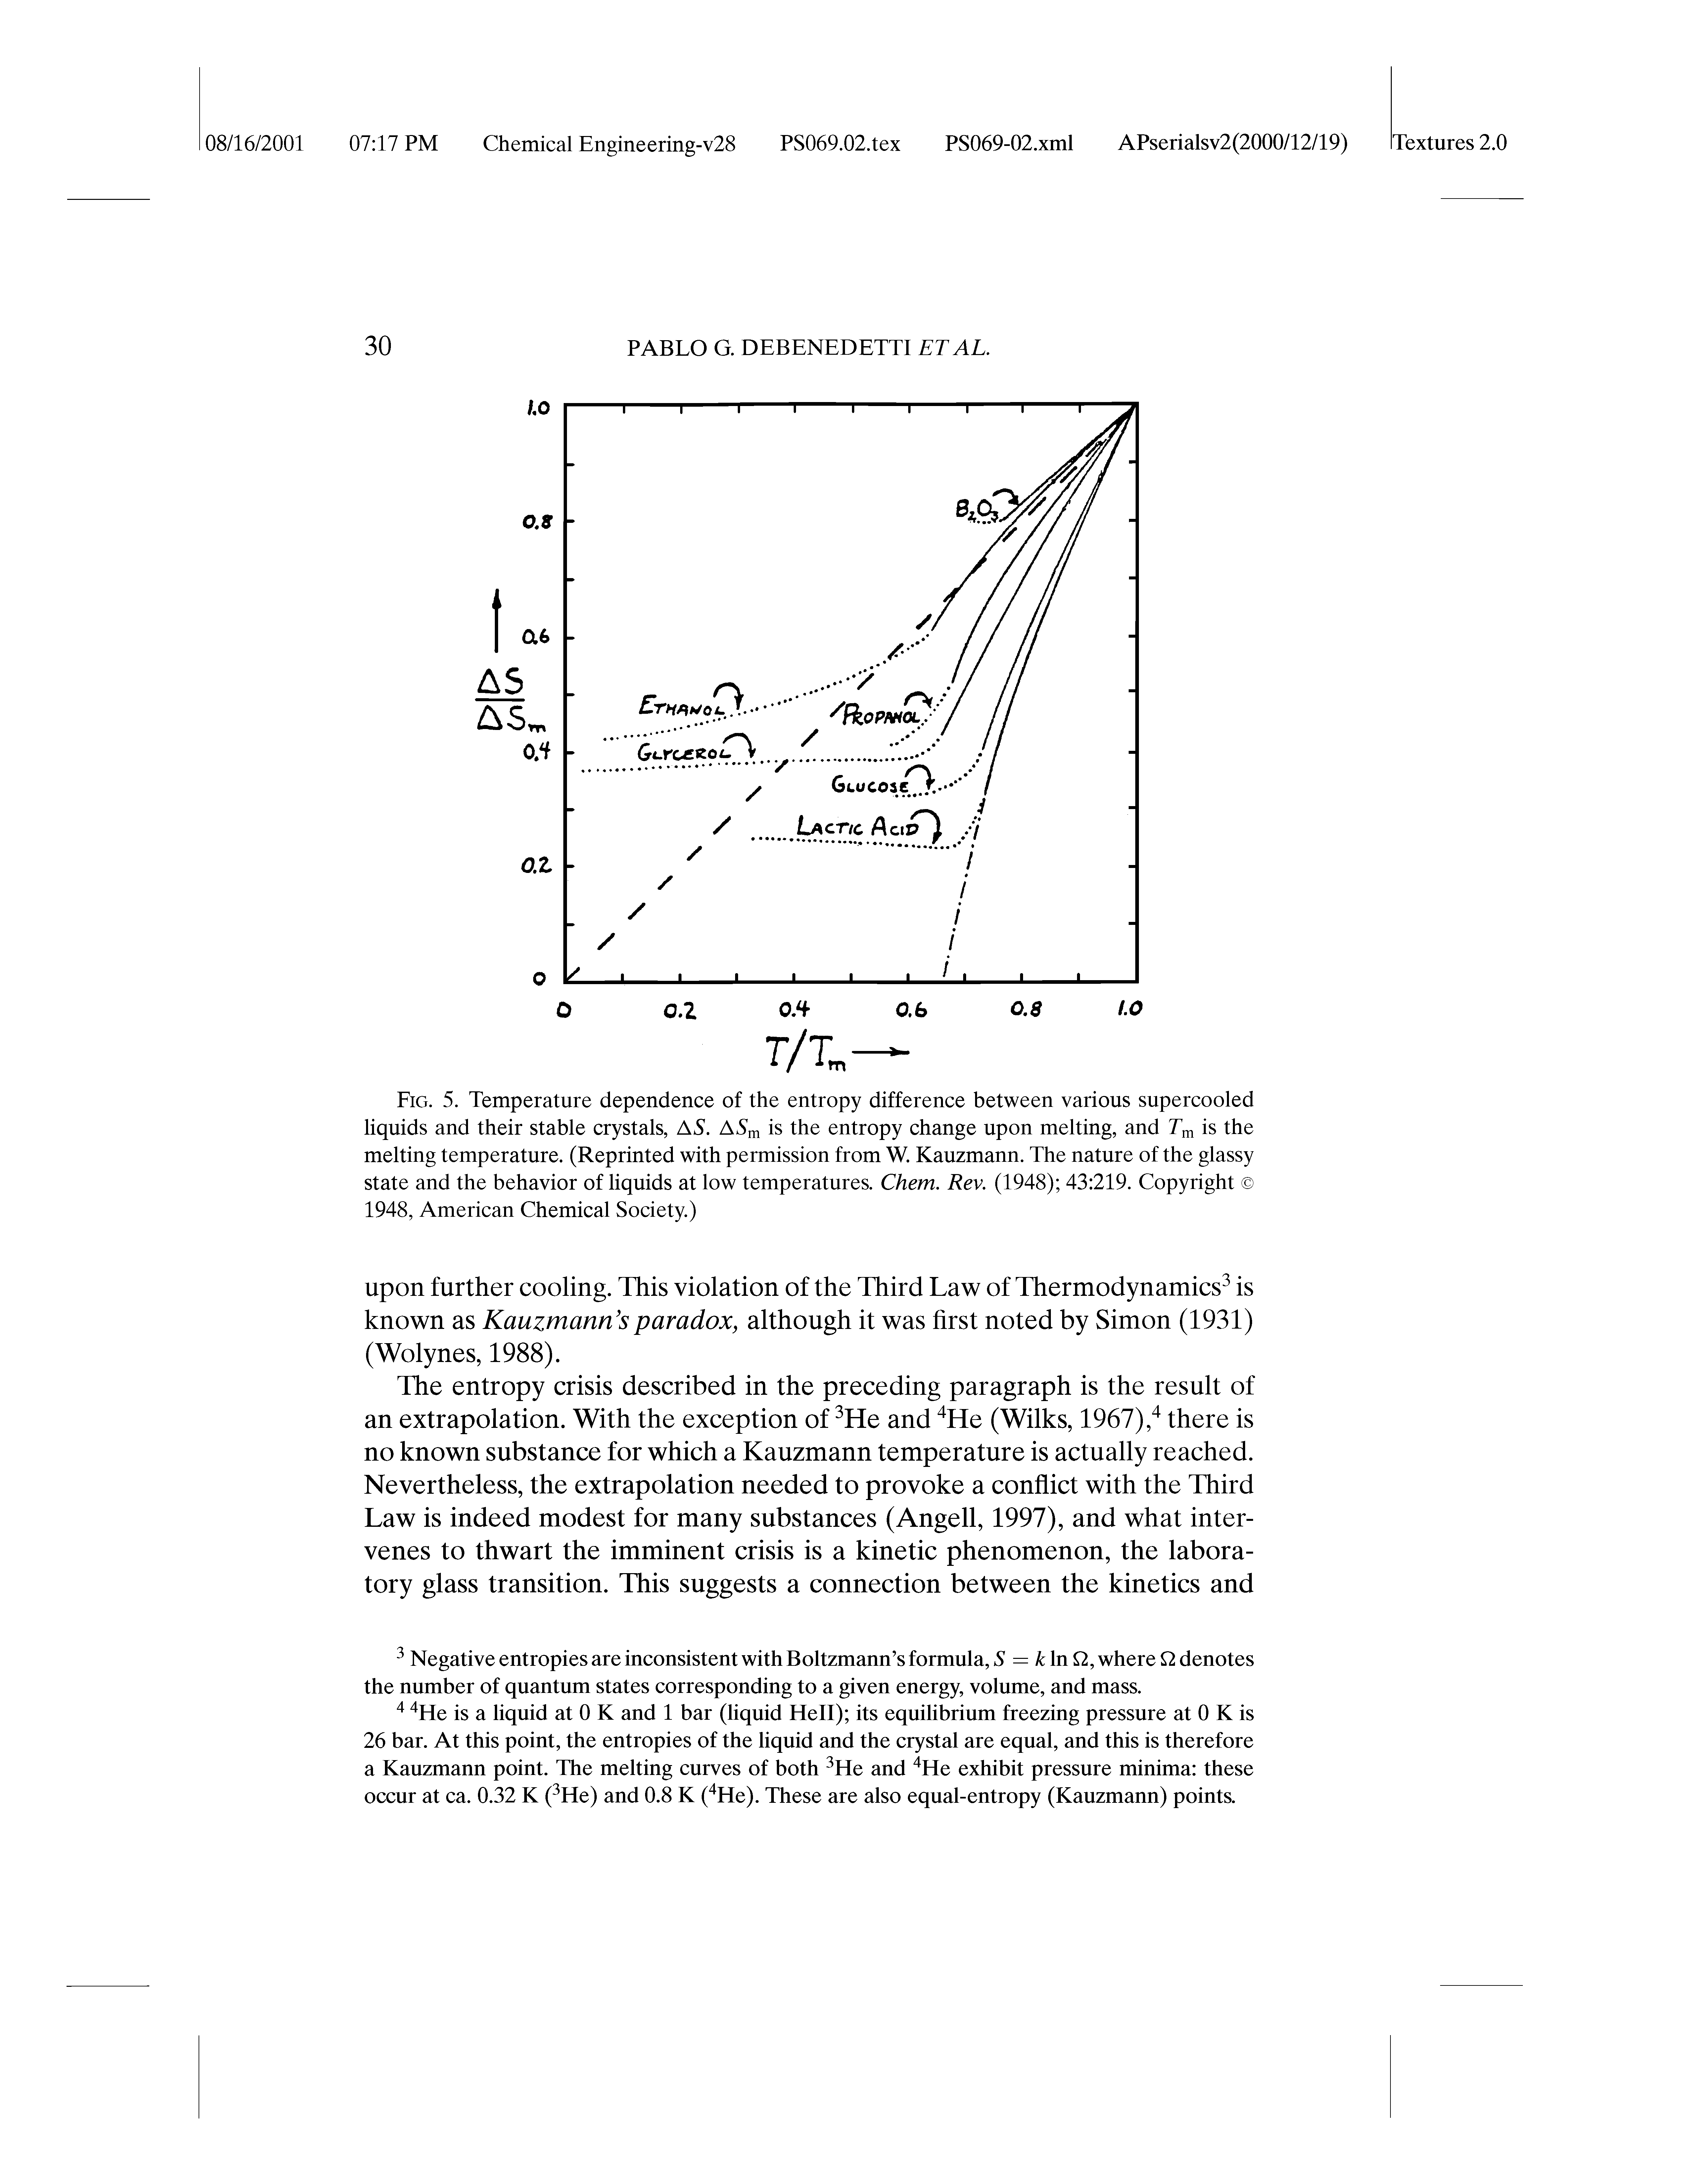 Fig. 5. Temperature dependence of the entropy difference between various supercooled liquids and their stable crystals, A5. is the entropy change upon melting, and is the melting temperature. (Reprinted with permission from W. Kauzmann. The nature of the glassy state and the behavior of liquids at low temperatures. Chem. Rev. (1948) 43 219. Copyright 1948, American Chemical Society.)...